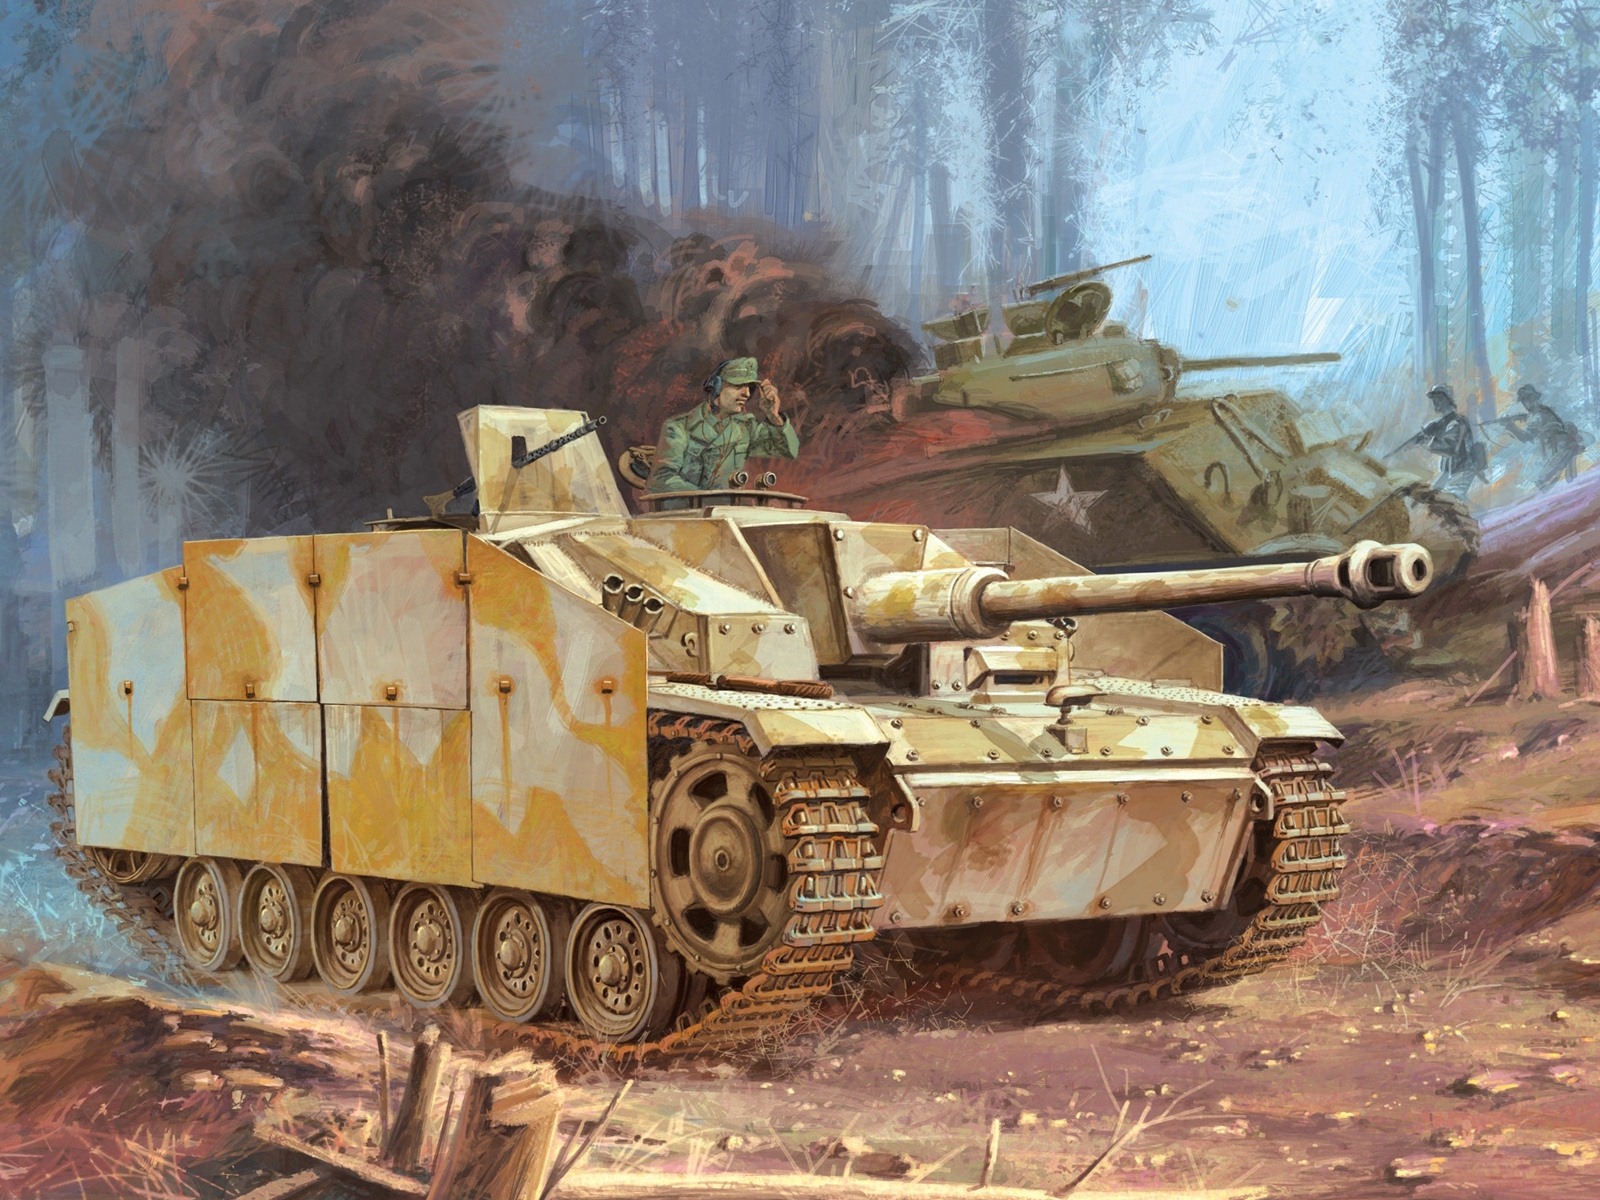 Military tanks, armored HD painting wallpapers #3 - 1600x1200